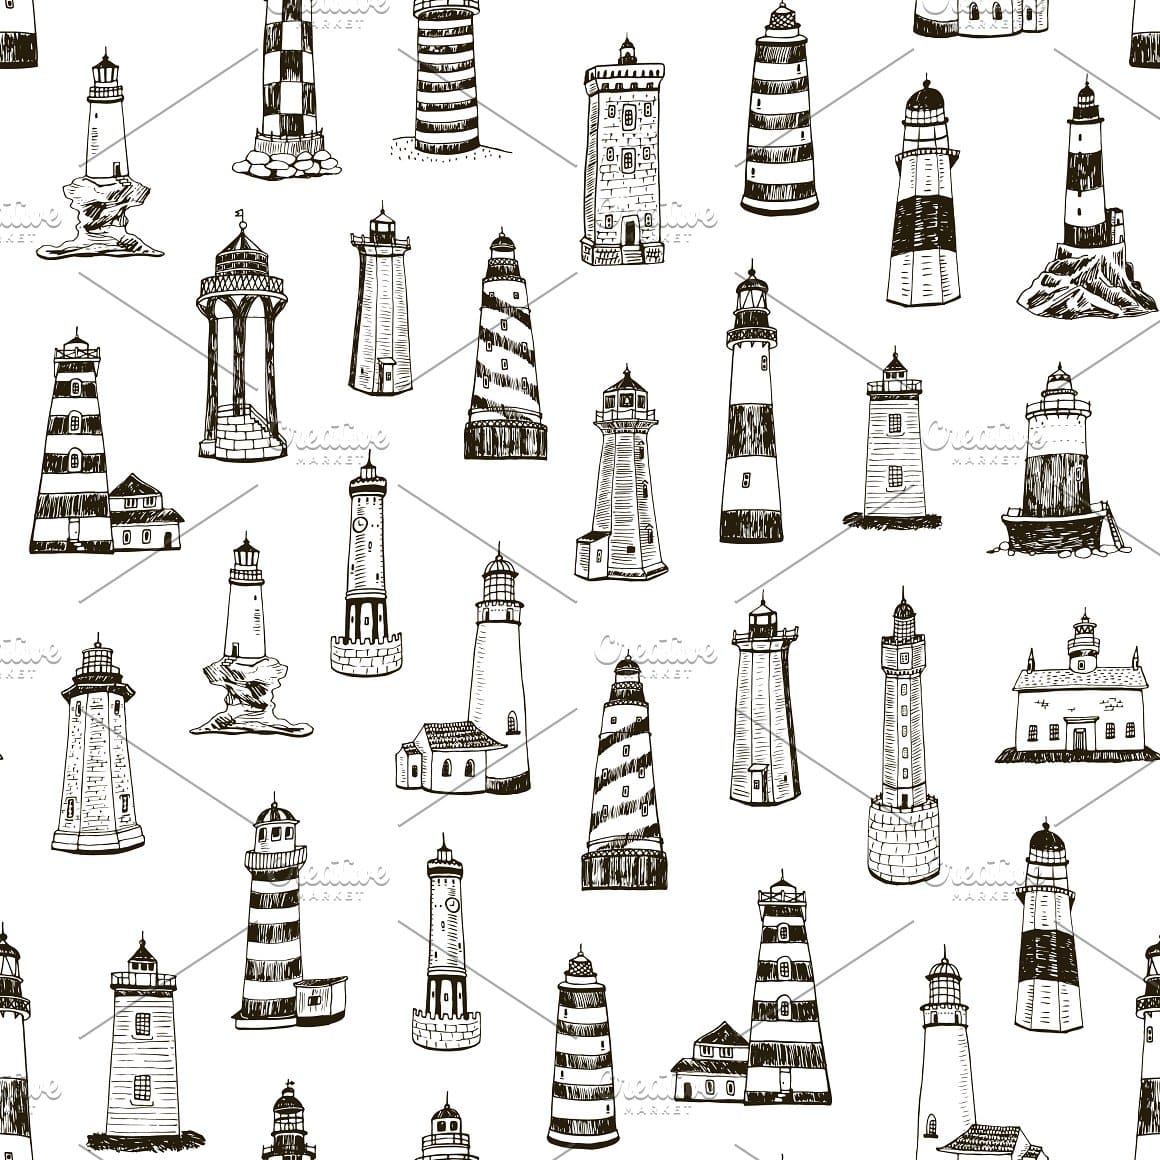 Round, square and polygonal lighthouses.